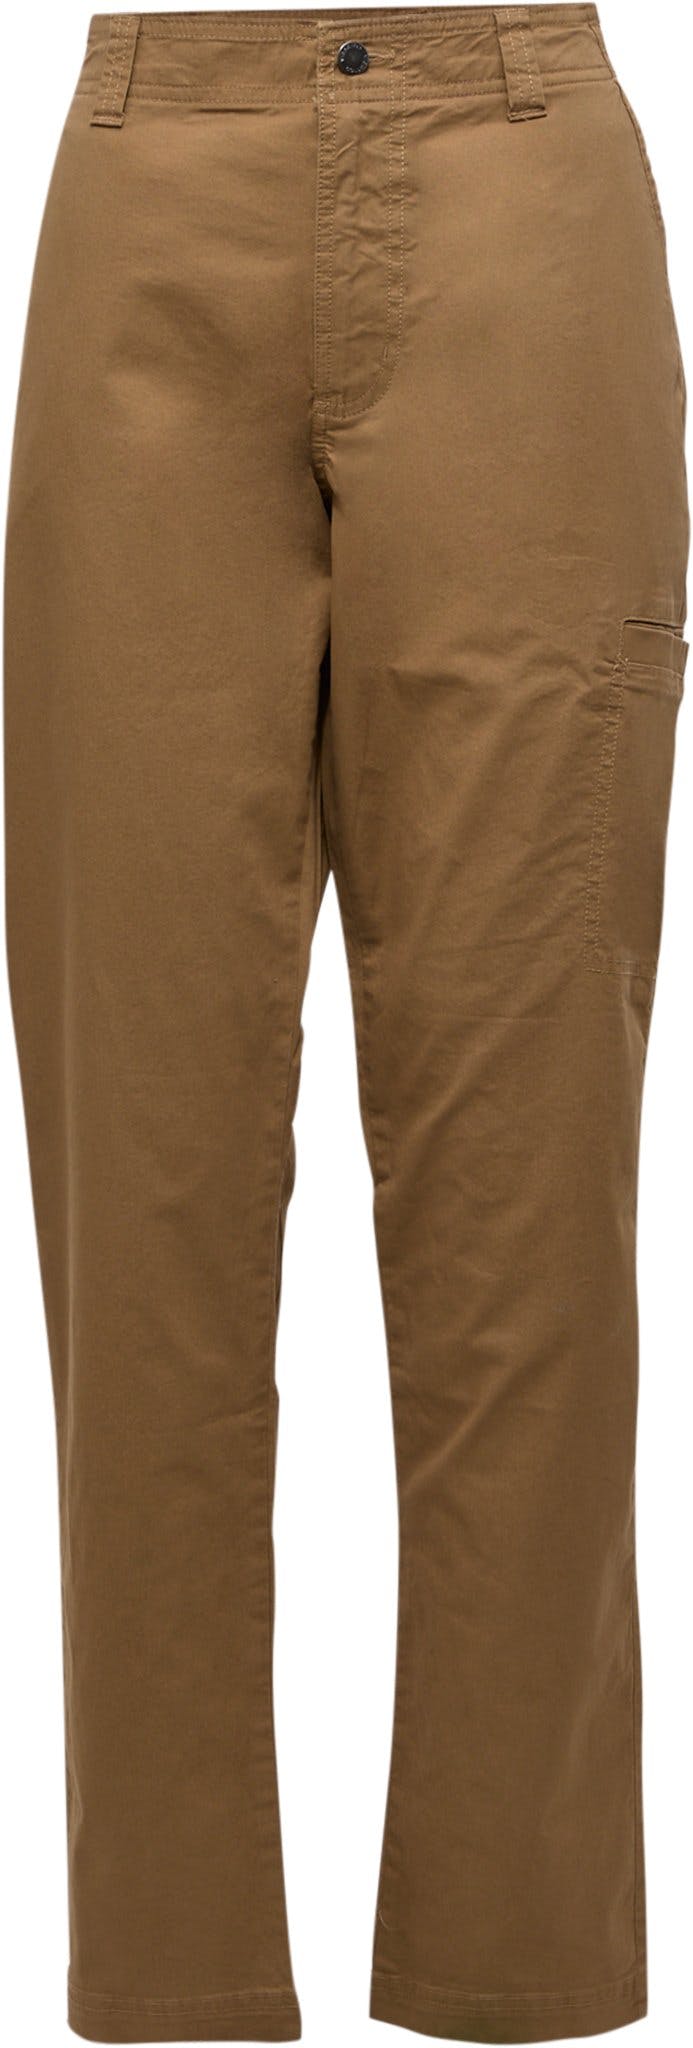 Product image for Pine Canyon Pant - Men's